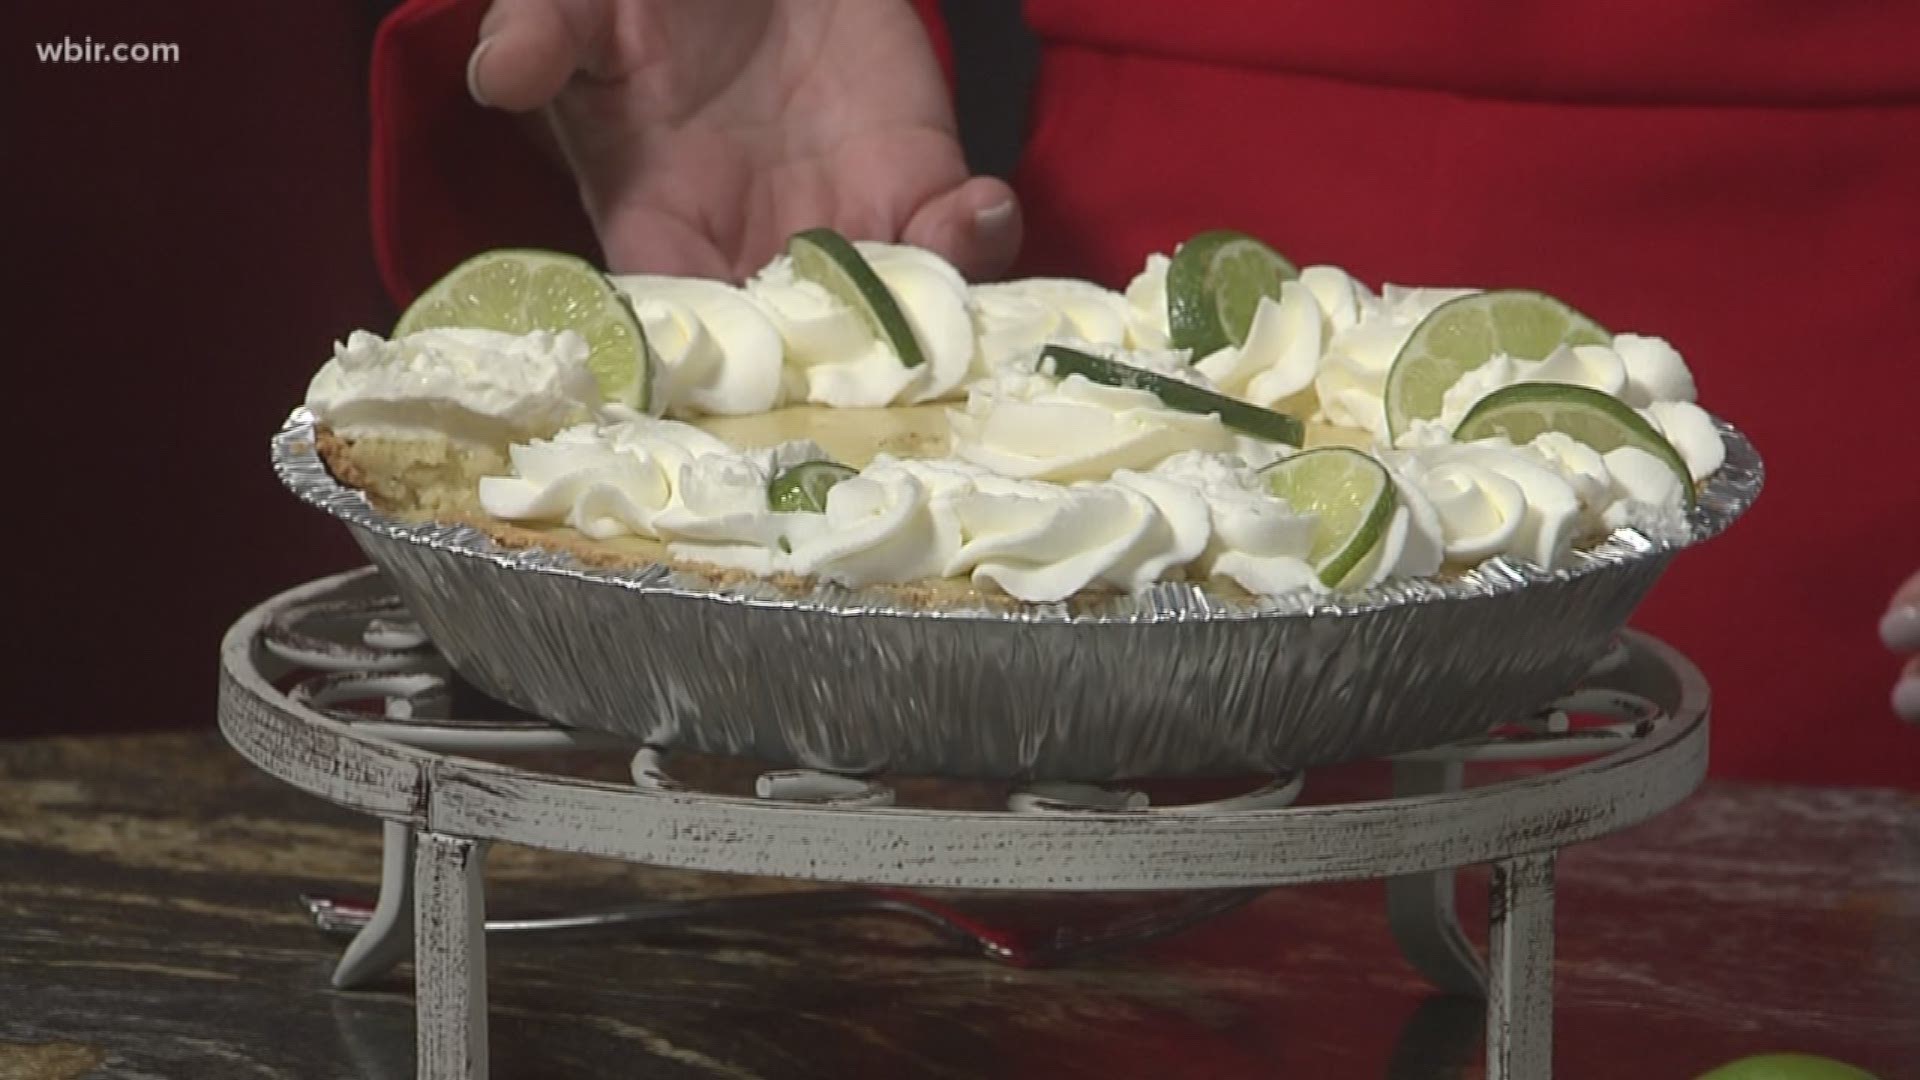 Tee Dedrick makes good use of 5 ingredients to make an easy key lime pie. For more on Tee's catering visit specialteecookies.com. March 18, 2019-4pm